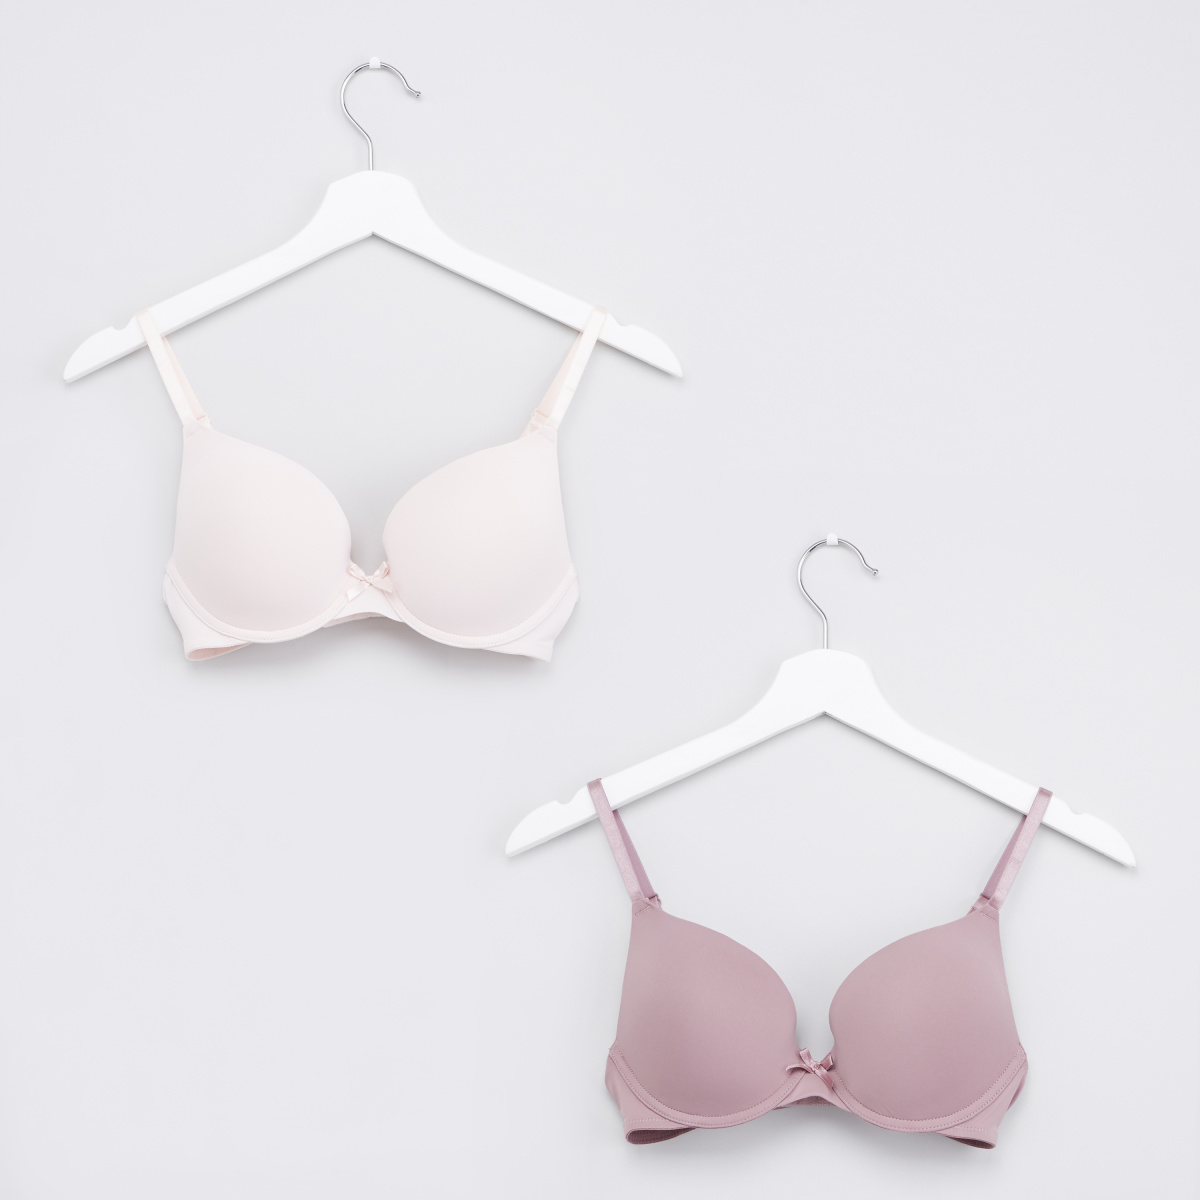 Buy Plain Padded Bra with Hook and Eye Closure